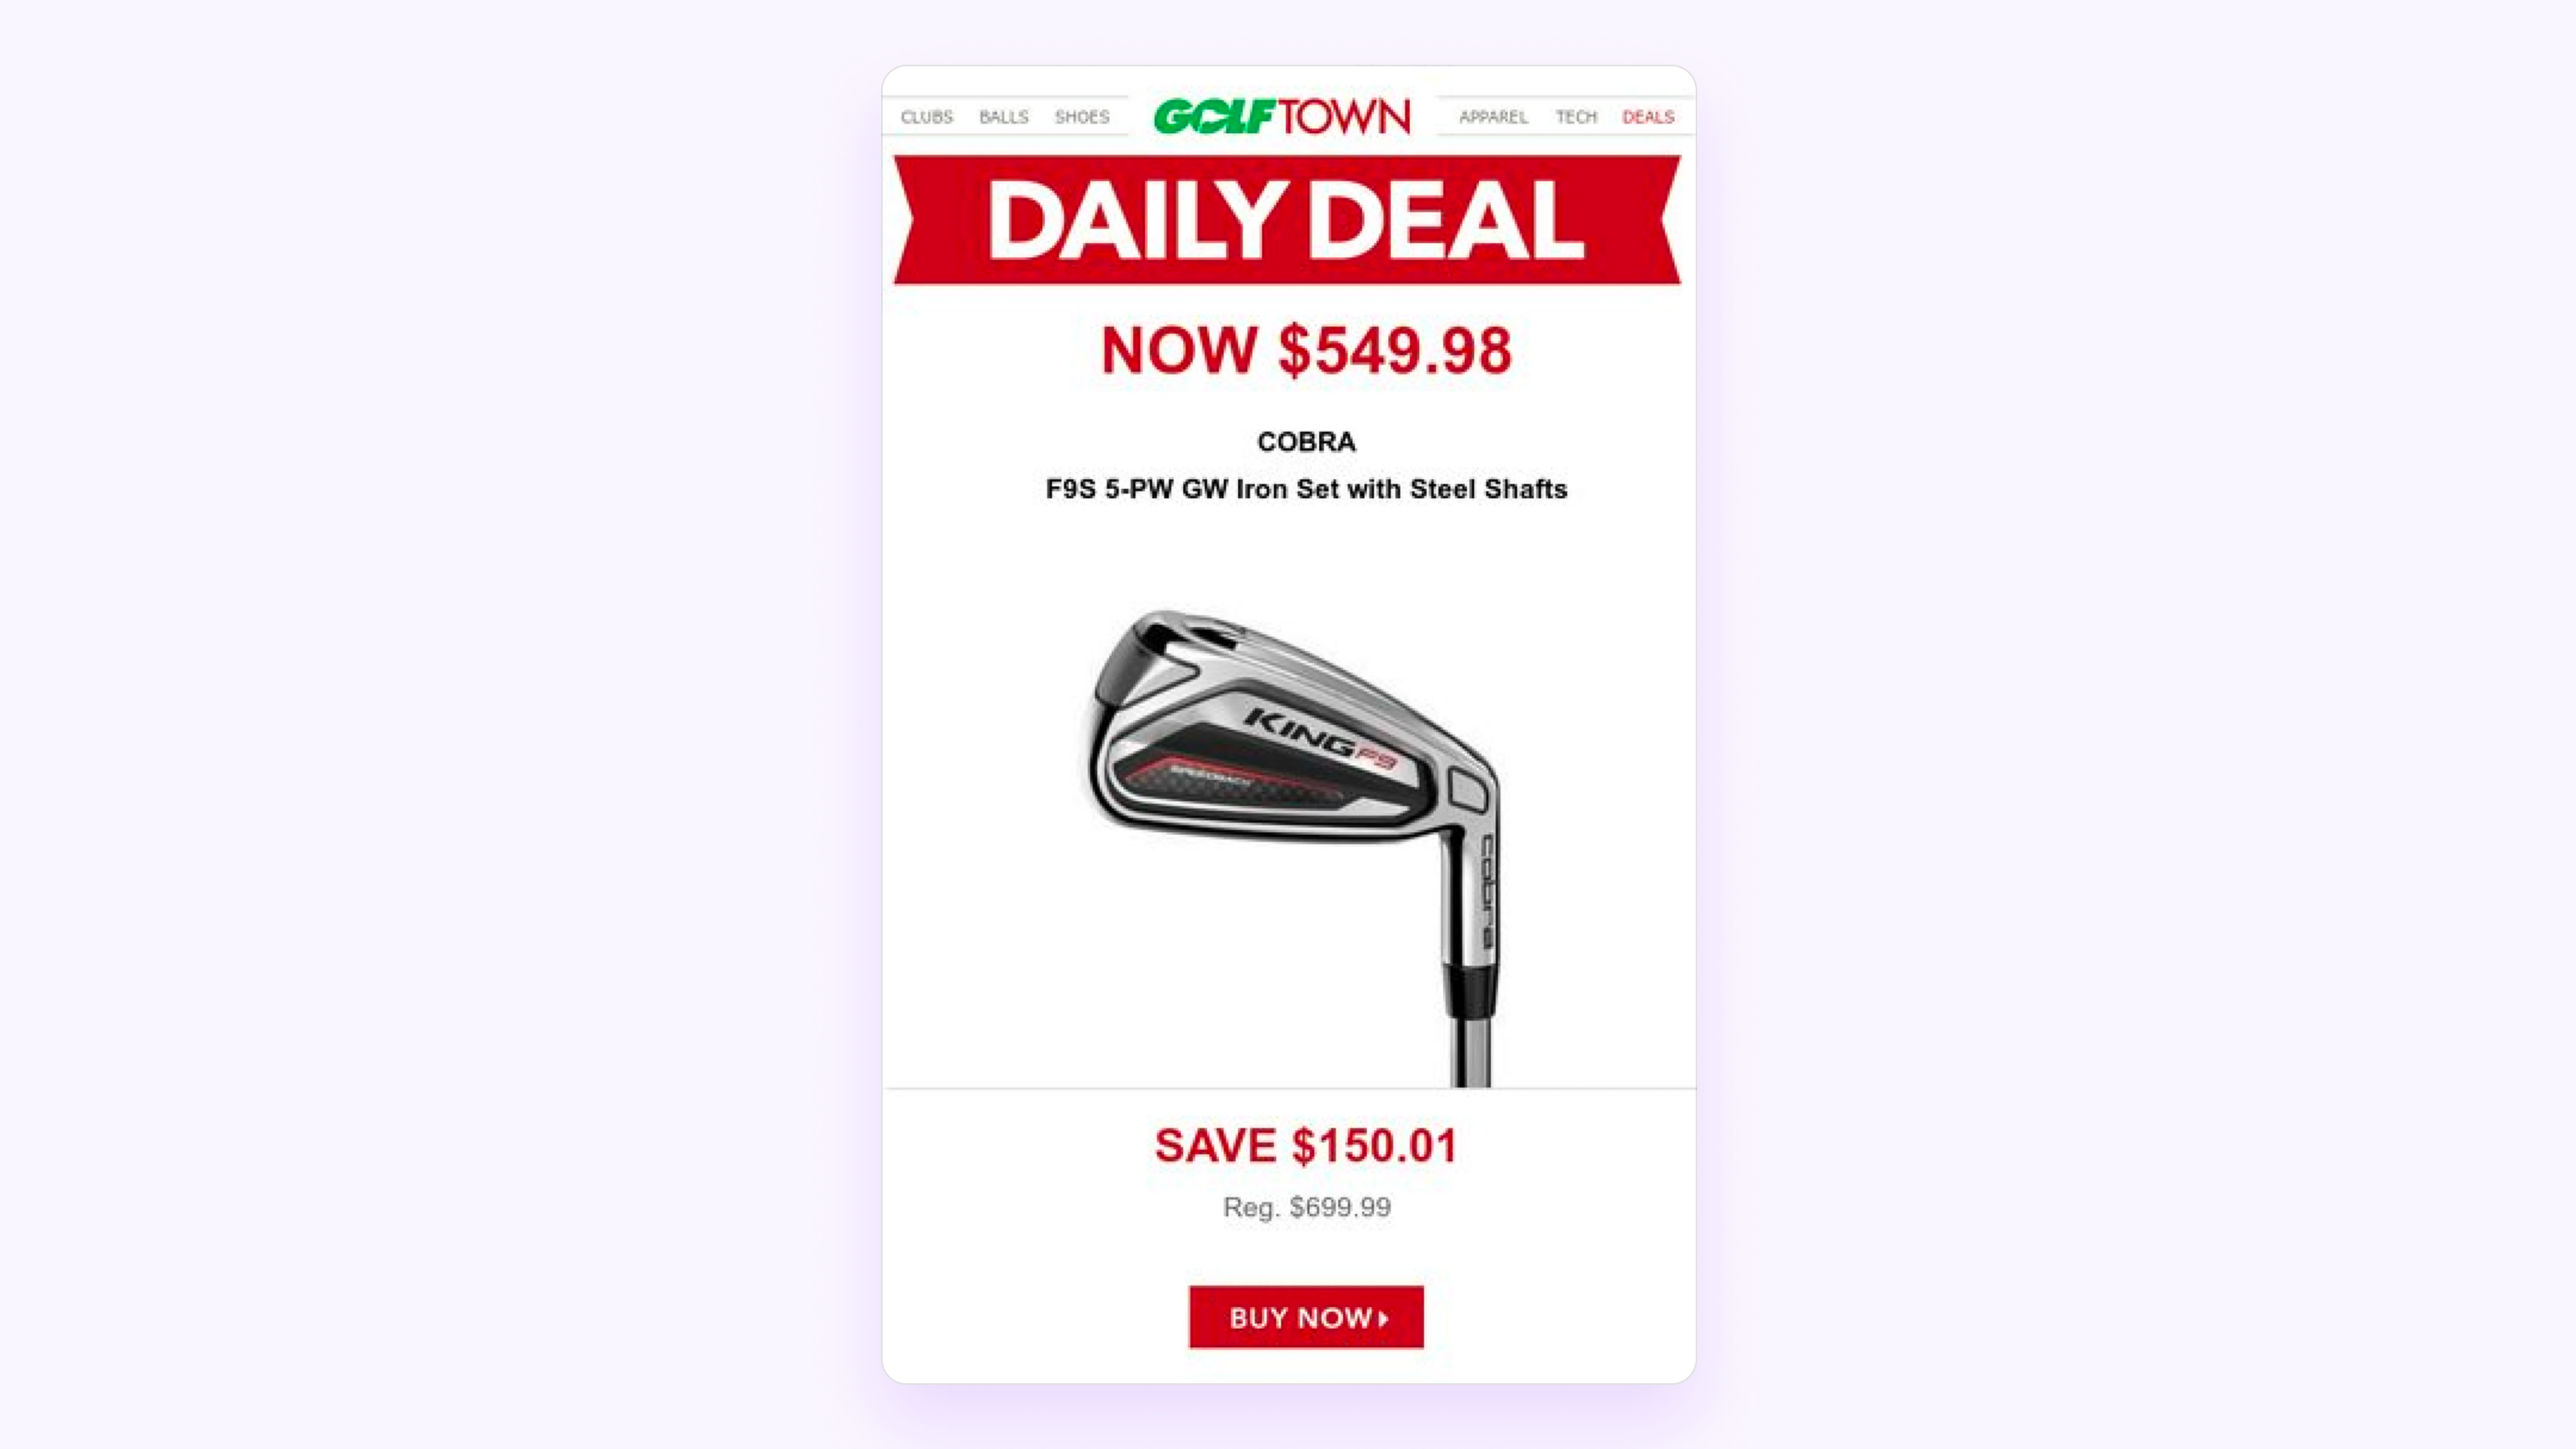 Image depicts a daily deal from retailer Golf Town